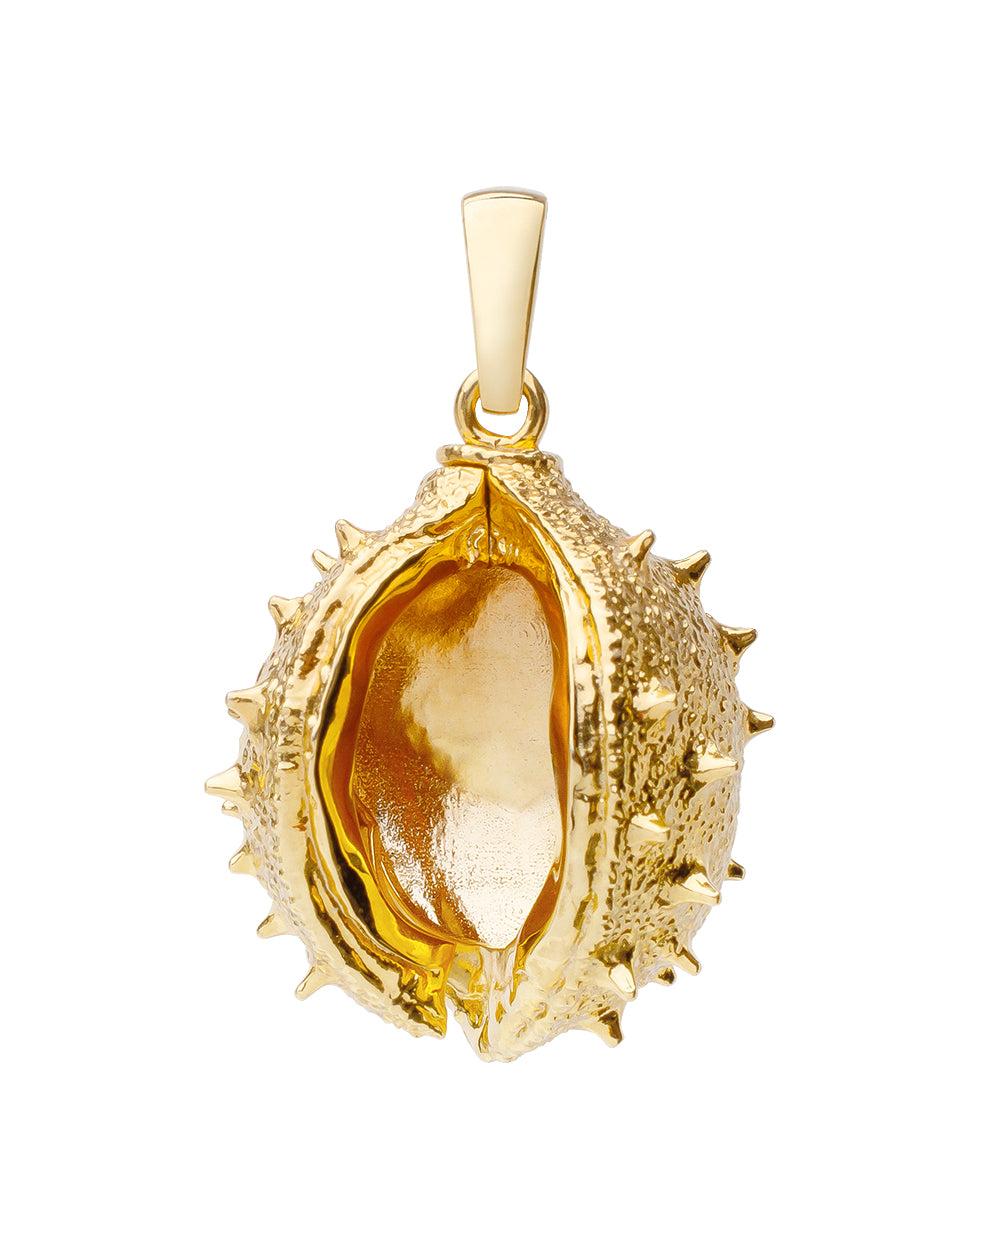 K01 Chestnut pendant made of brass plated with 24K gold / diameter 30 mm